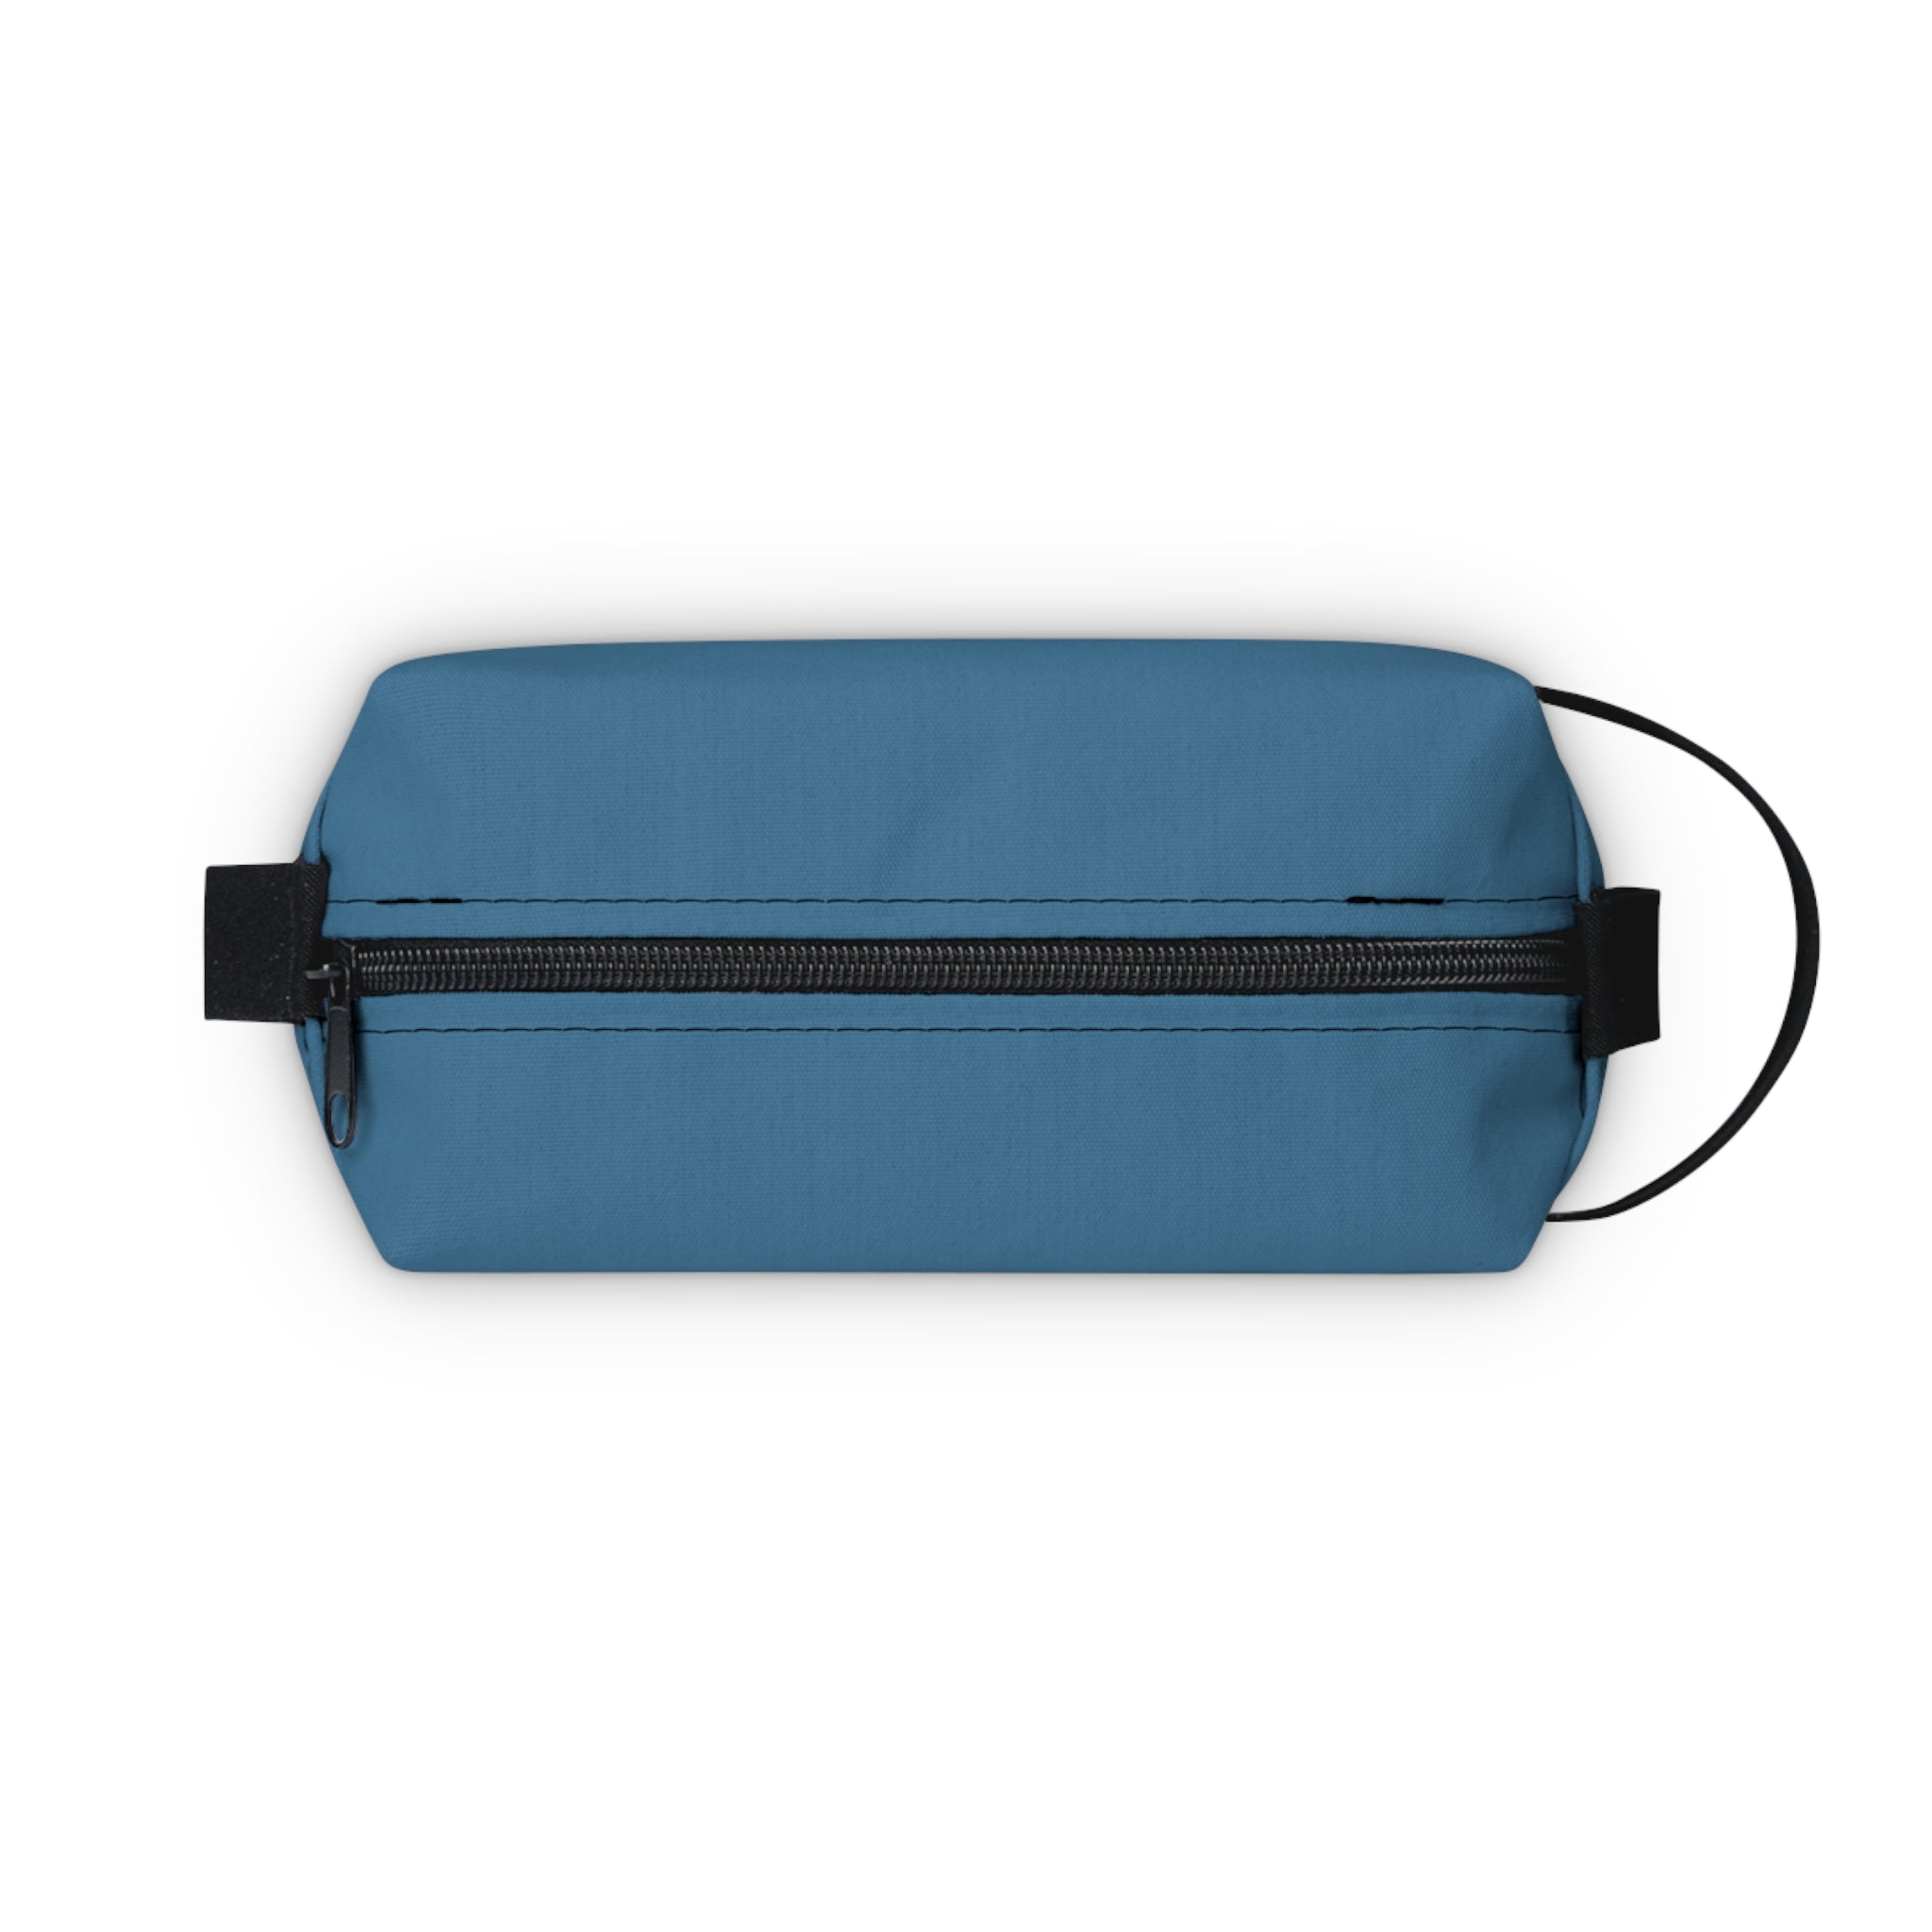 Mr. Toiletry Pouch (Blue)